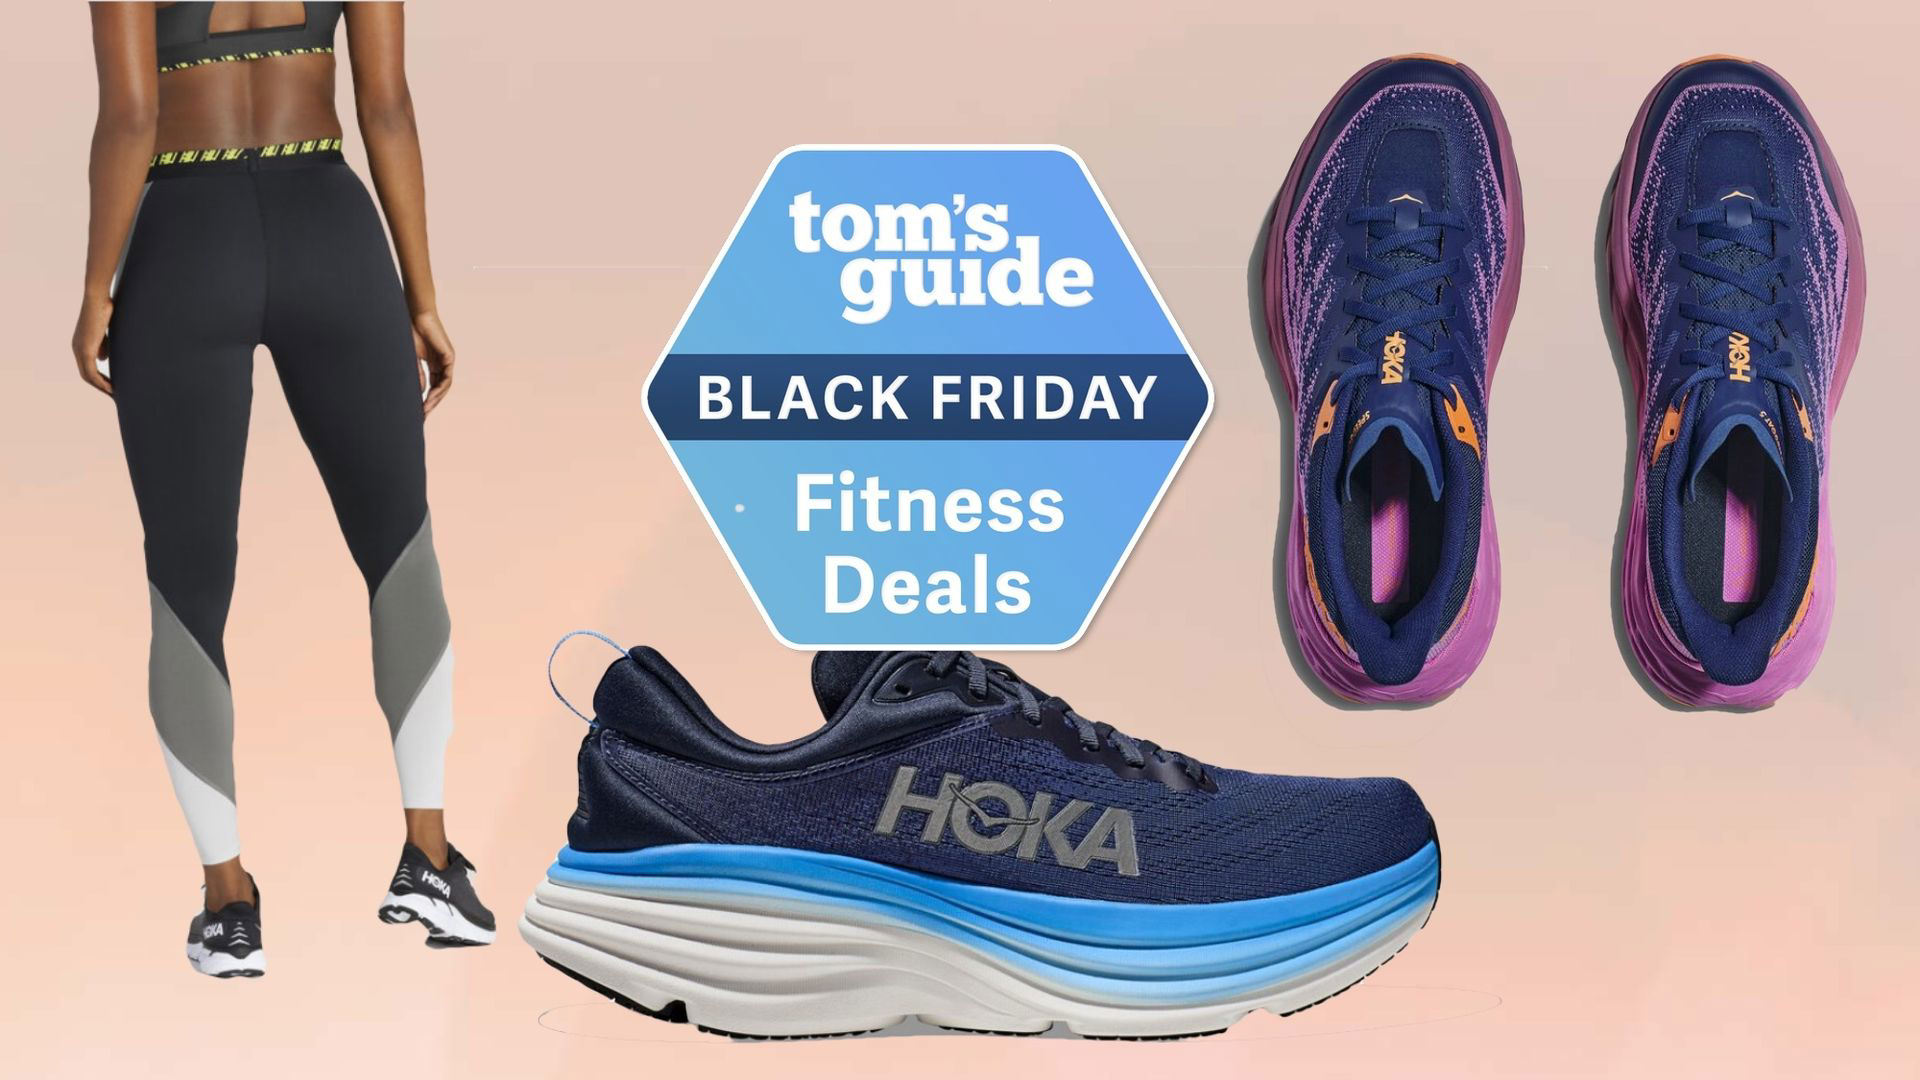 9 things to buy in the Hoka Black Friday sale starting at 14